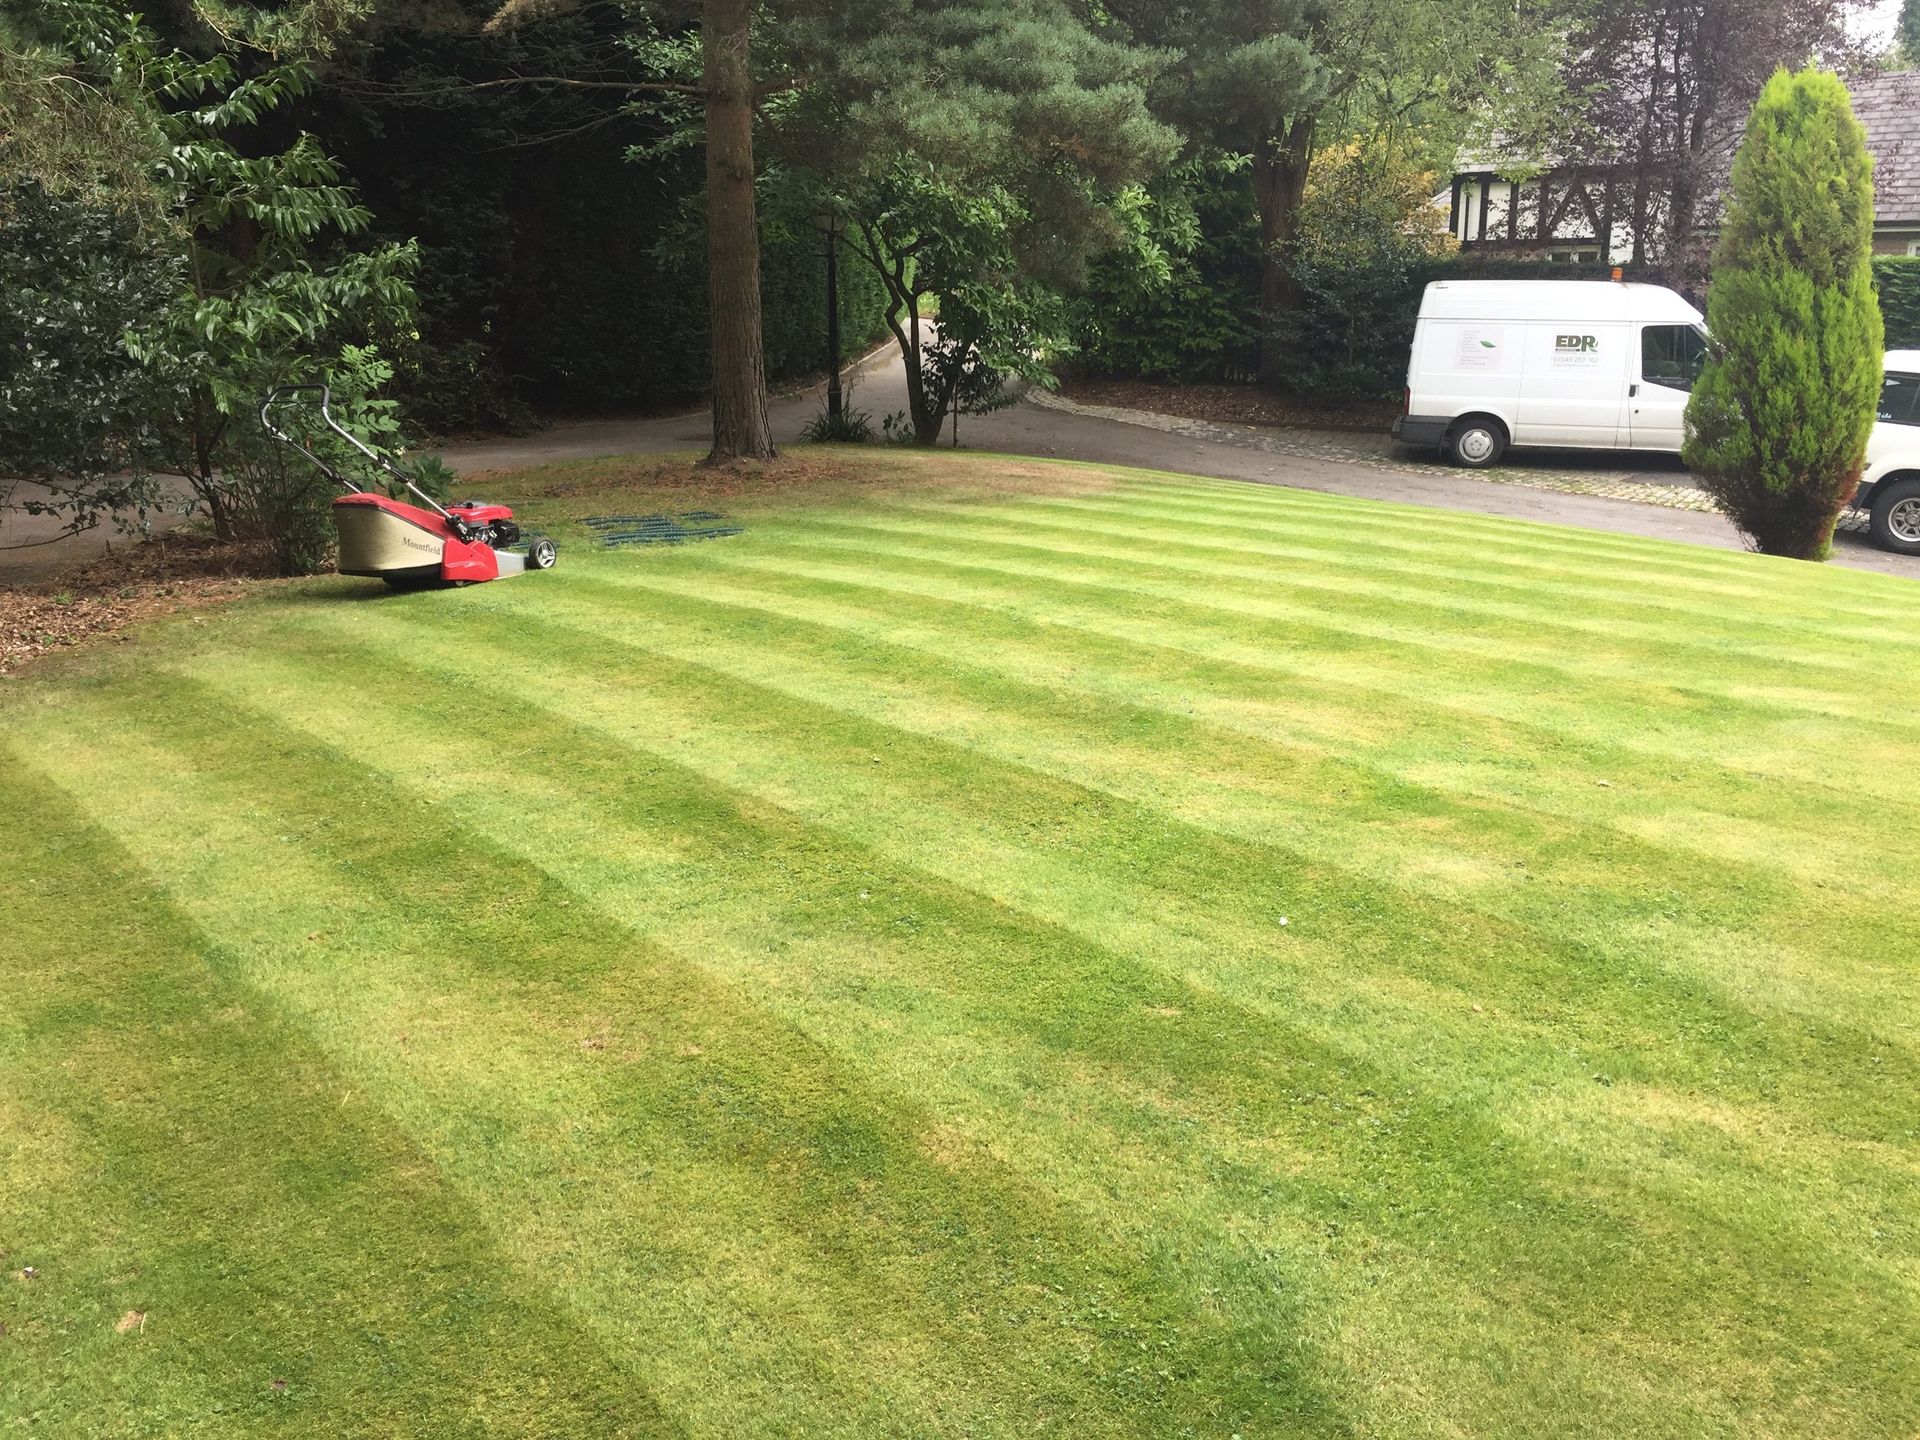 striped lawn that has been cut by mower